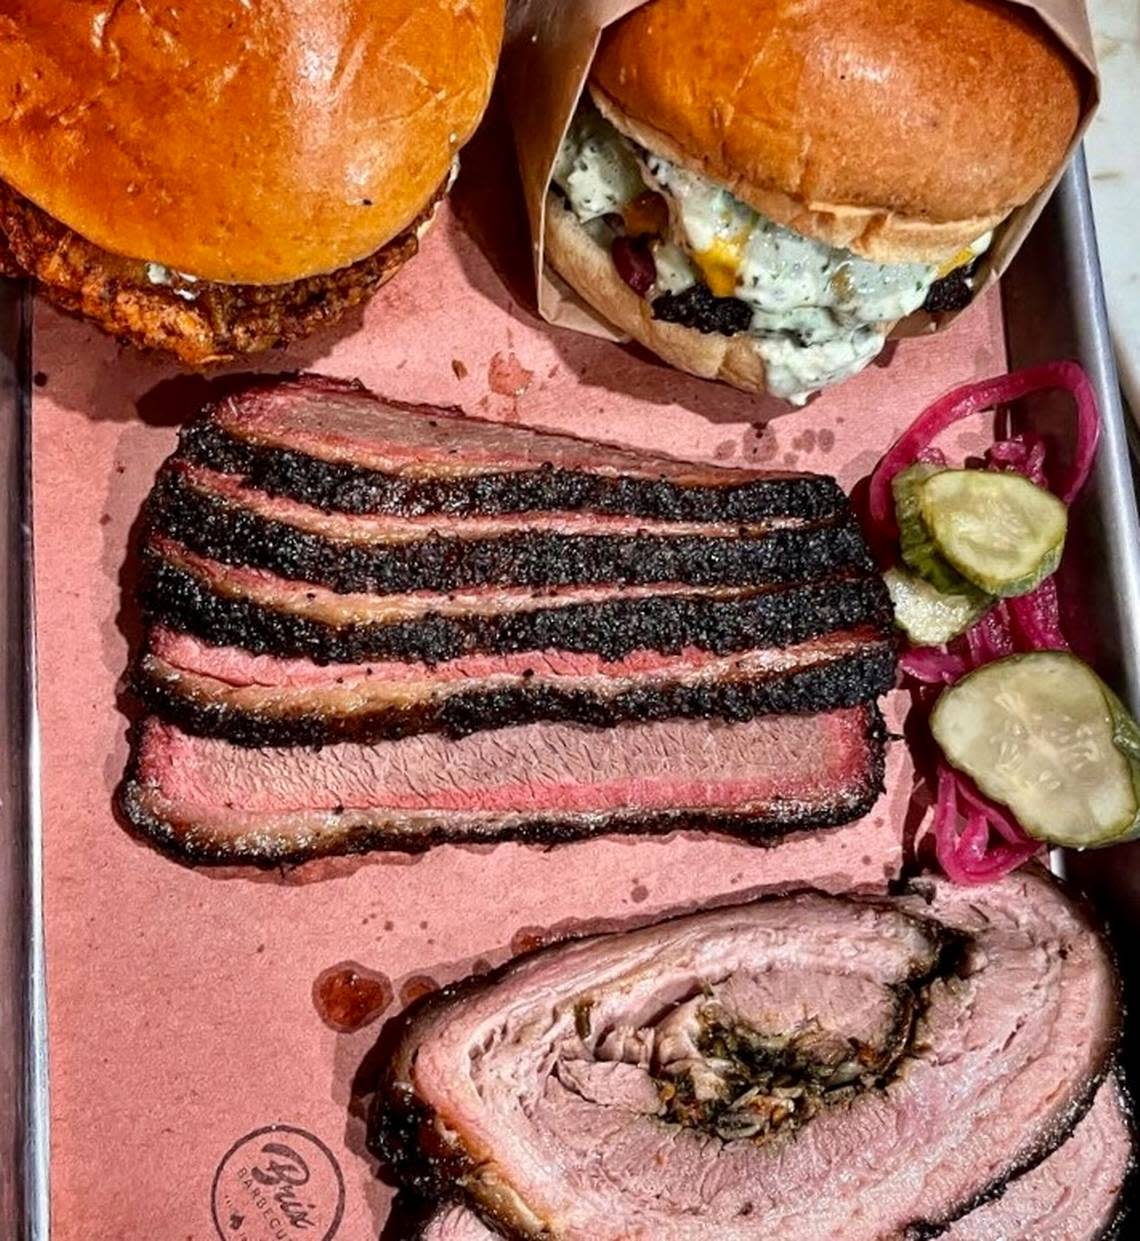 A hot chicken sandwich, burger, prime brisket and stuffed pork belly at Brix Barbecue in Fort Worth. Handout photo